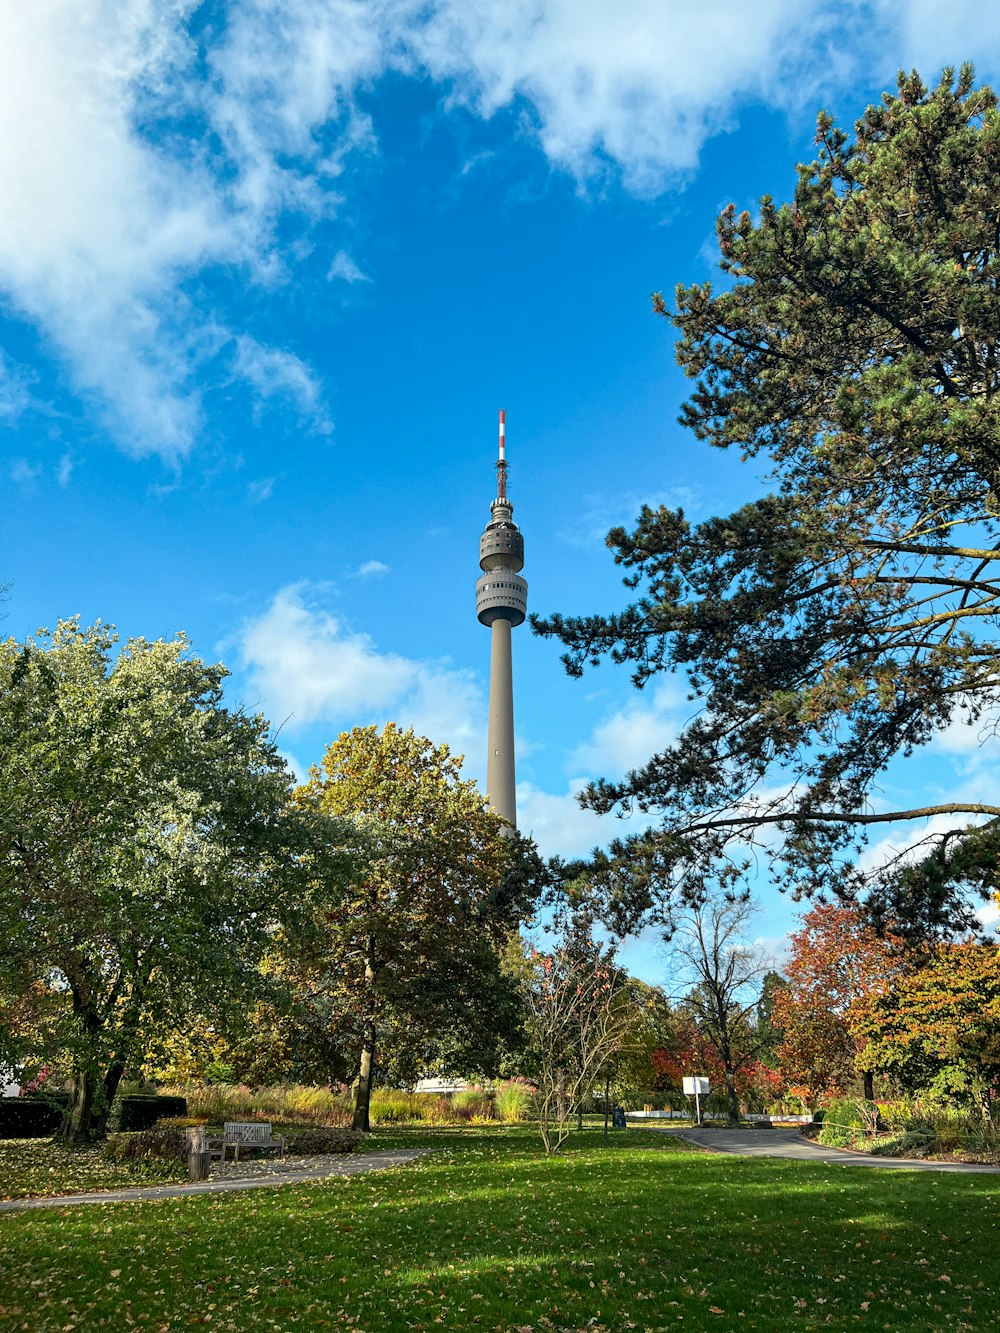 a tall tower towering over a lush green park